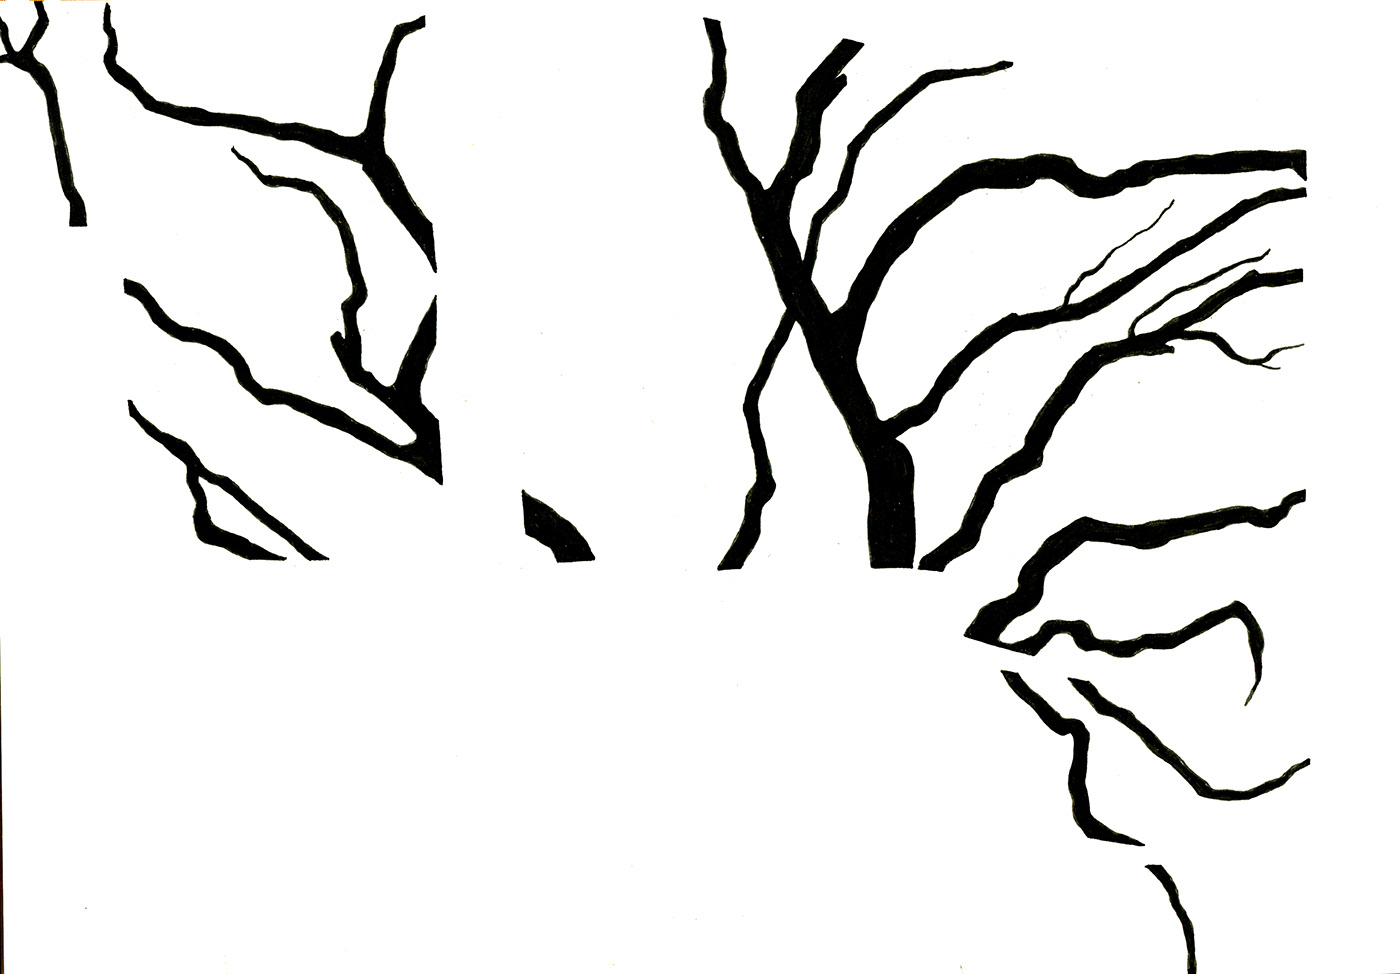 Tree  trees black White negative space pen ink black and white Nature Environmentalist